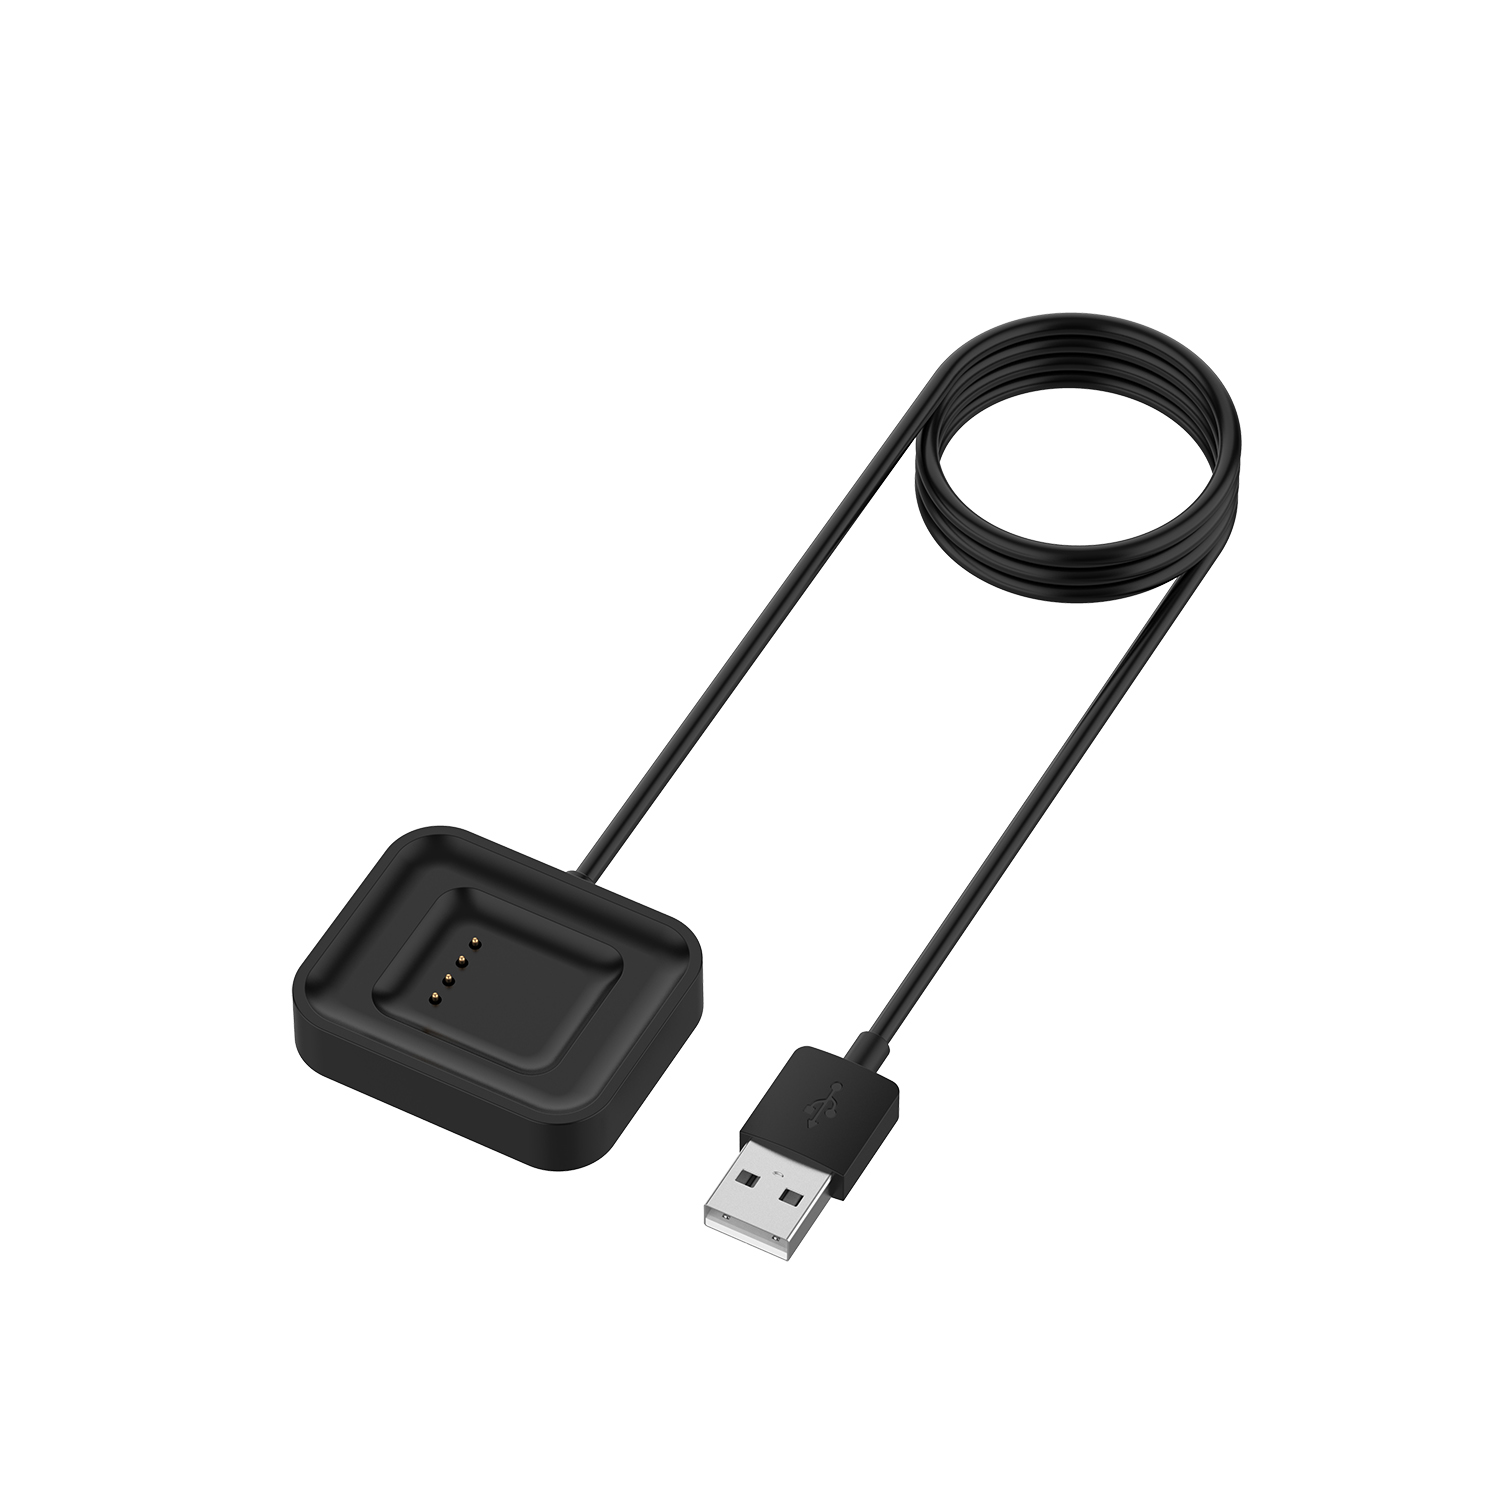 2pcs/lot 1m USB Charging Cable for Xiaomi Mi Watch Charger Adapter Cradle Cord Base Dock Sport Smart Wrist watch Bluetooth